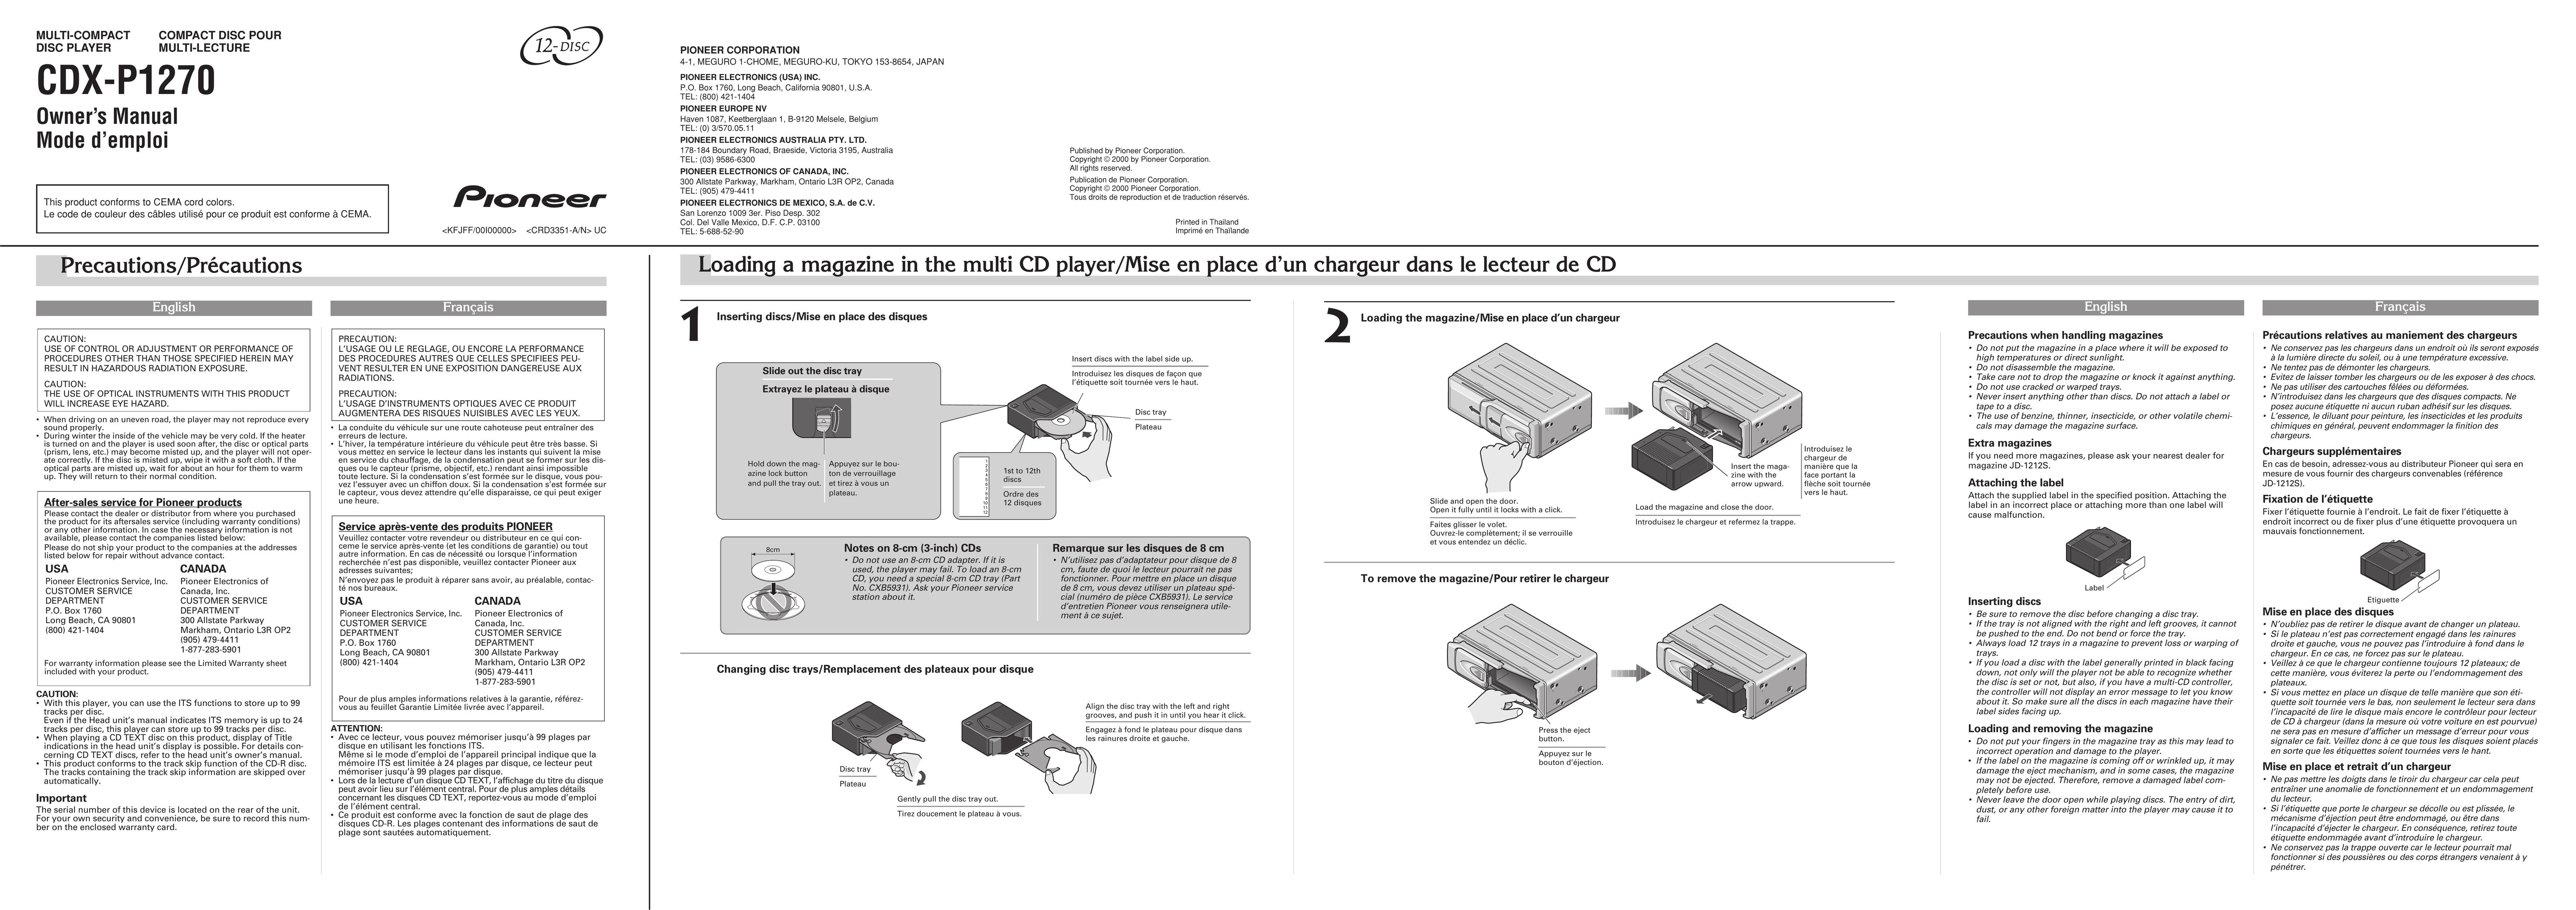 Pioneer CDX-P1270 Car Stereo System User Manual